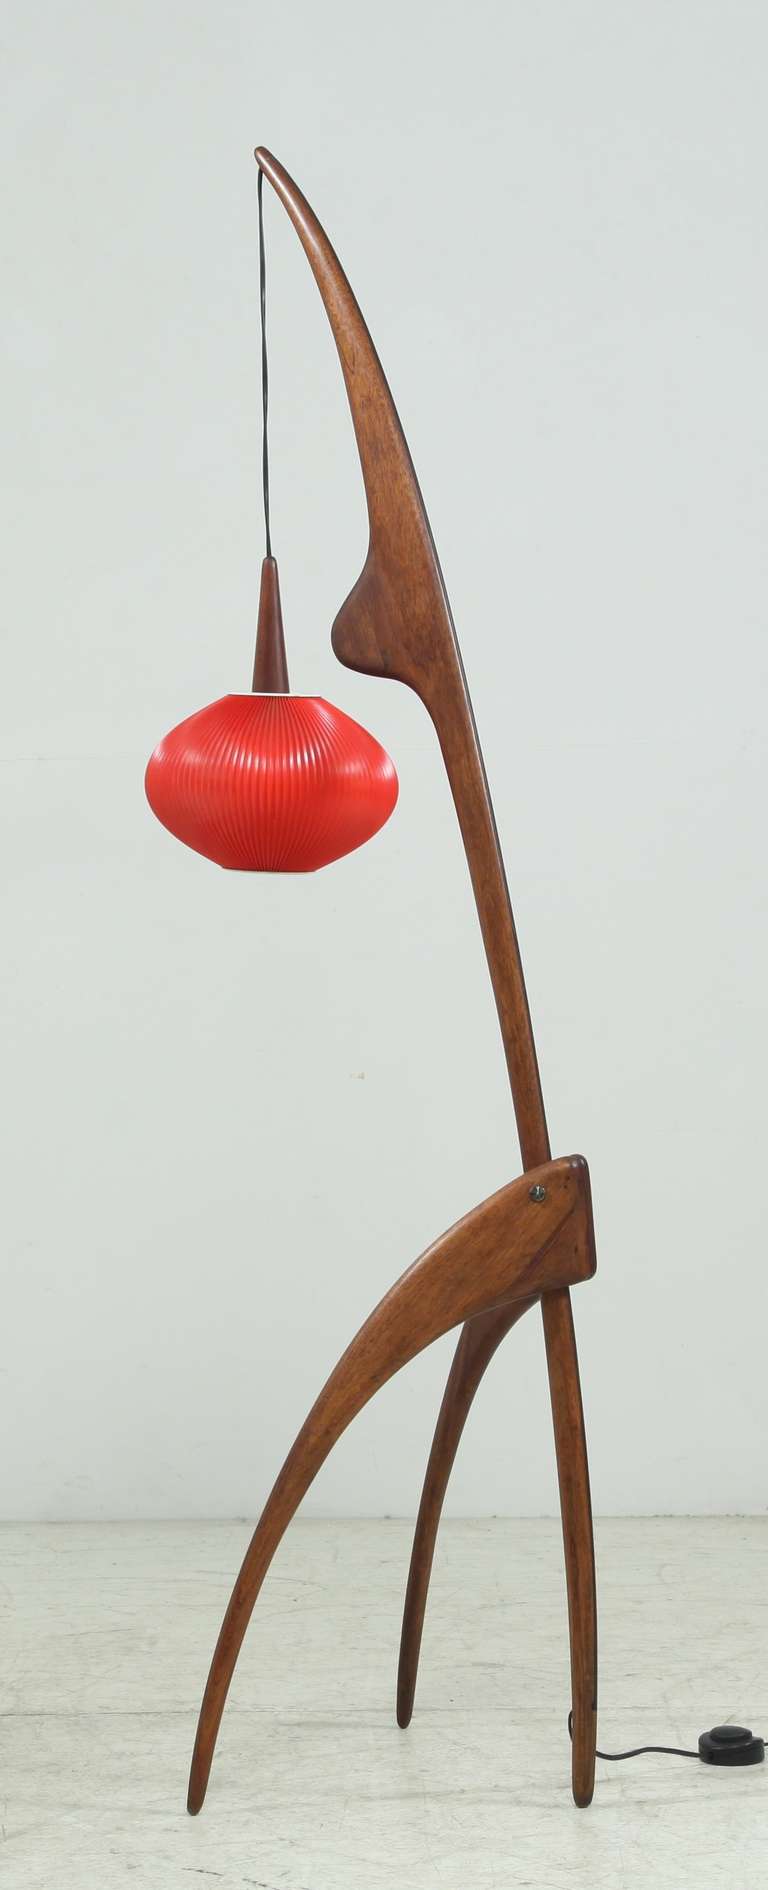 Iconic in its kind, this Rispal floor lamp is a beautiful Classic piece, with a rare to find red shade.
This model is inspired by the work of artist Jean (Hans) Arp.